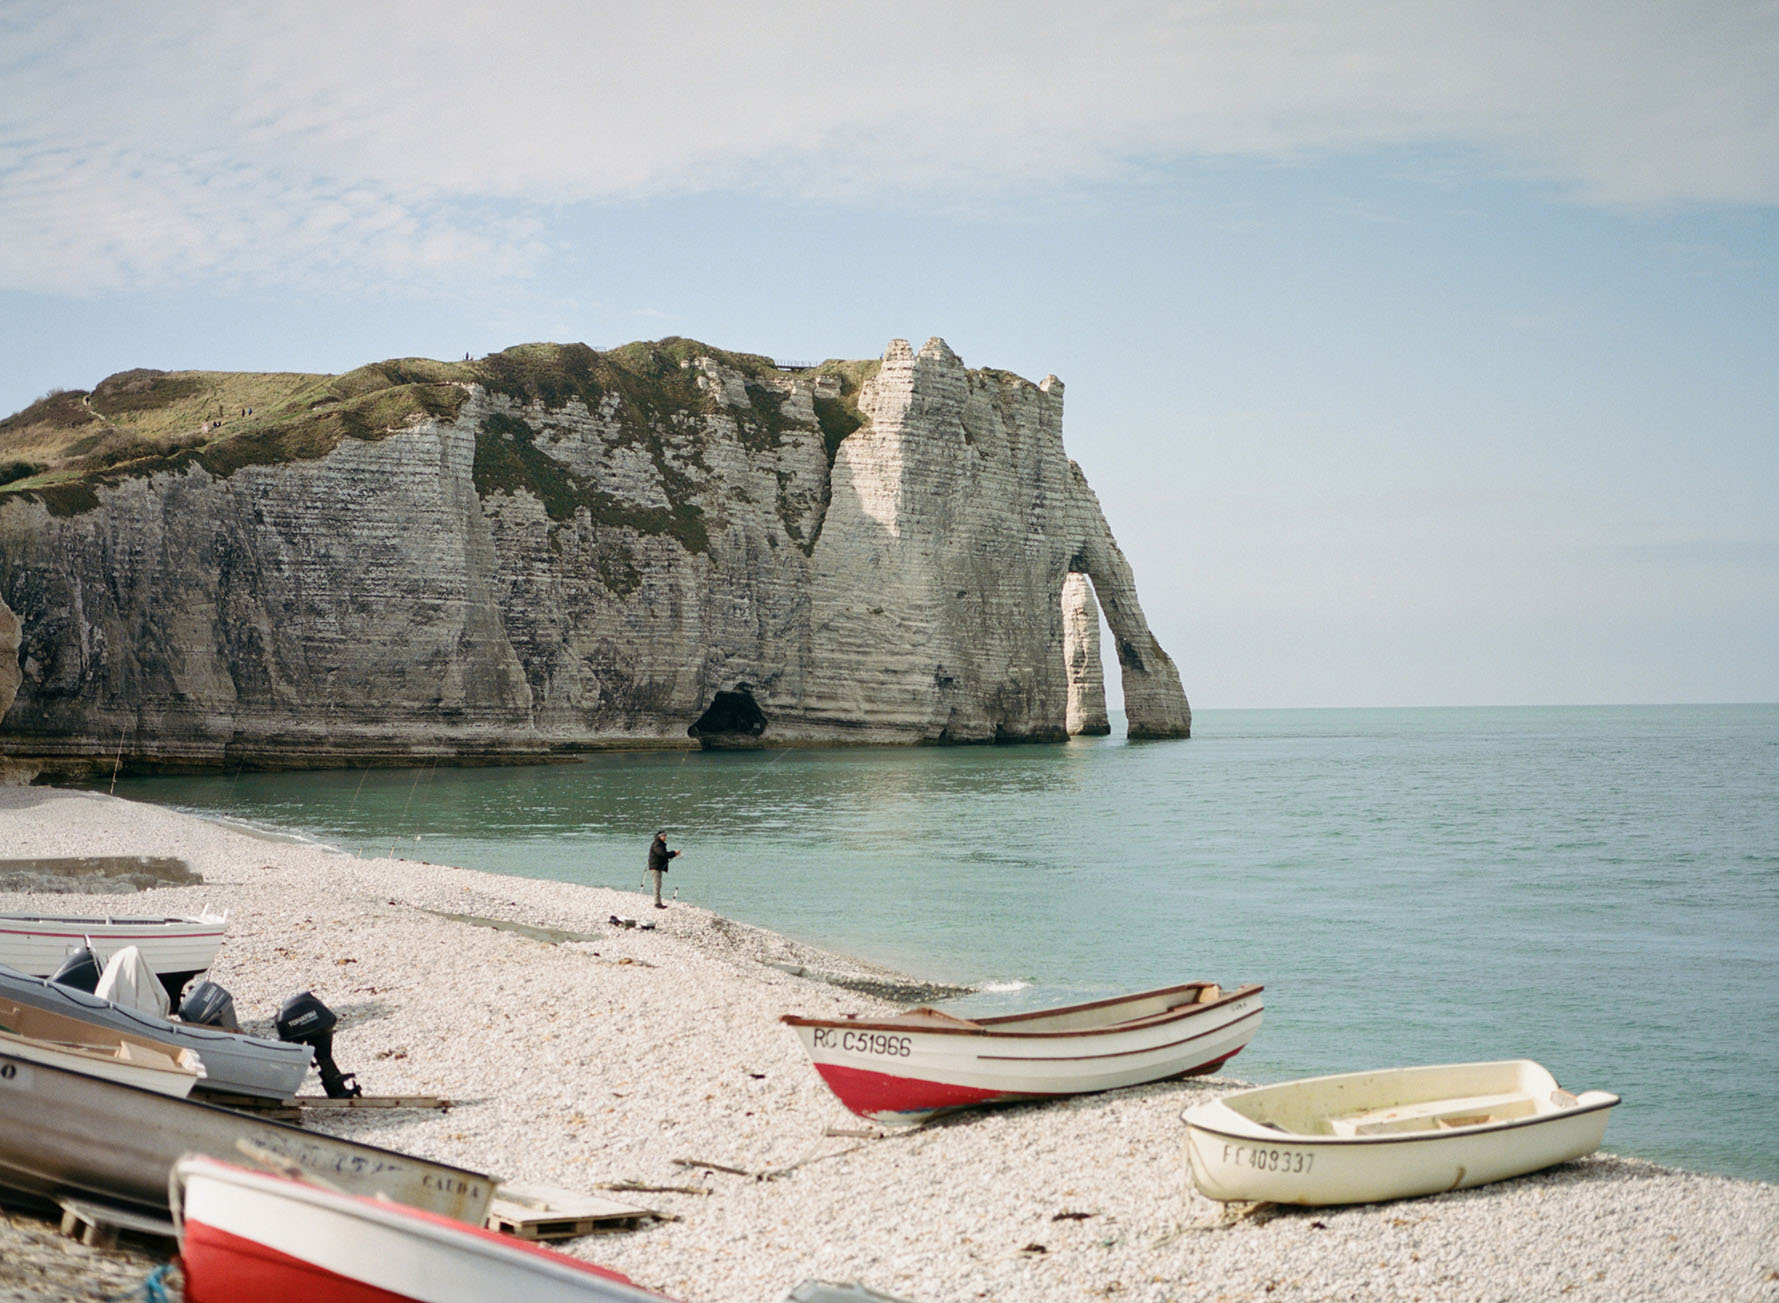 View of an empty French beach with cliffs in the back ground, calm water, and boats sitting on shore